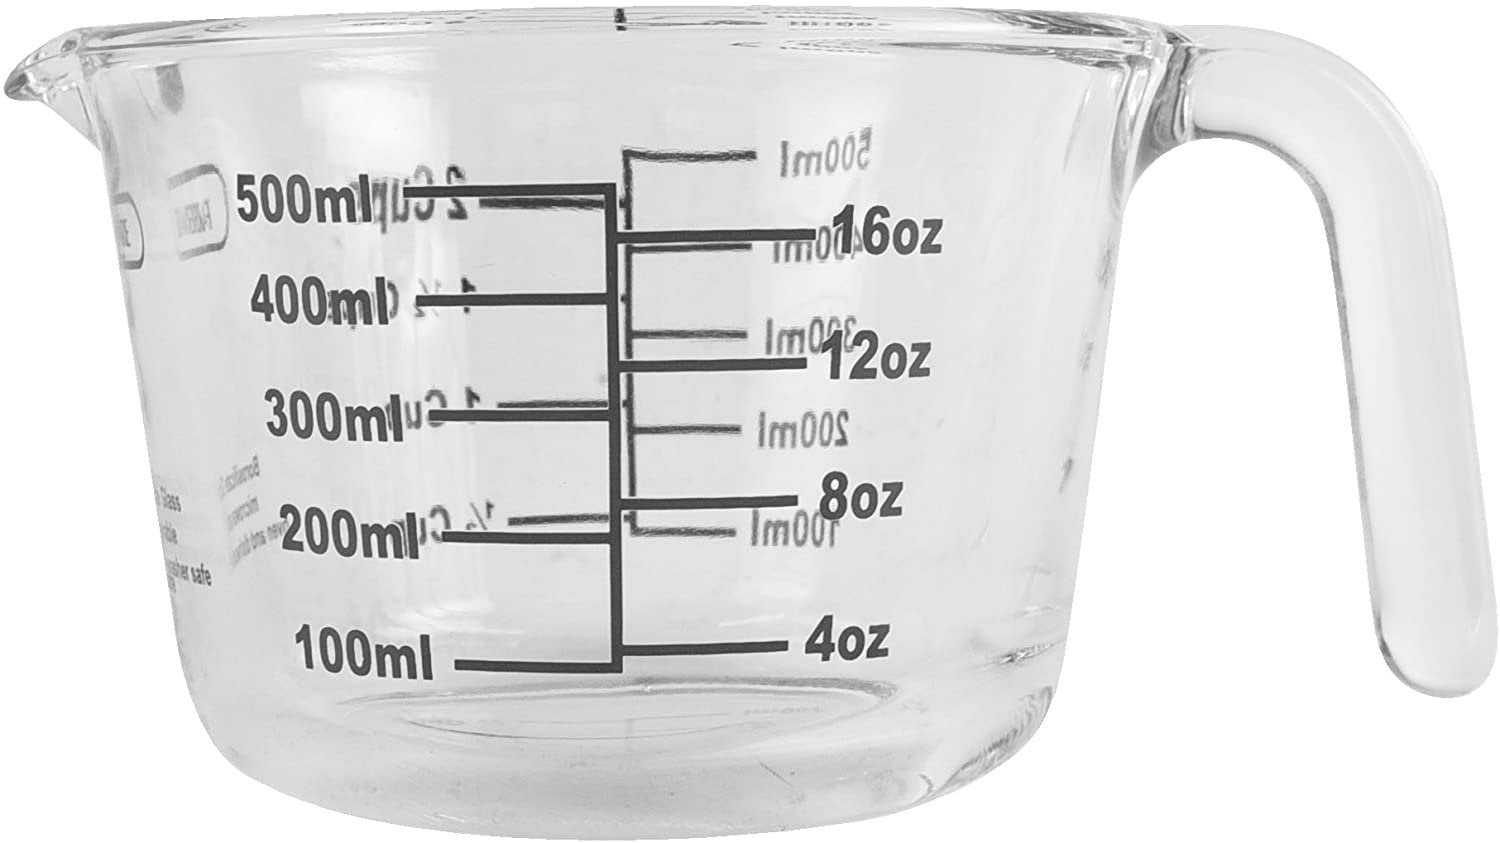 Rocaware 2 Cup Borosilicate Glass Measuring Cup with 50ml Intervals Scale New Kitchen Accessories Easy Measure Liquid Powder Milk Cups